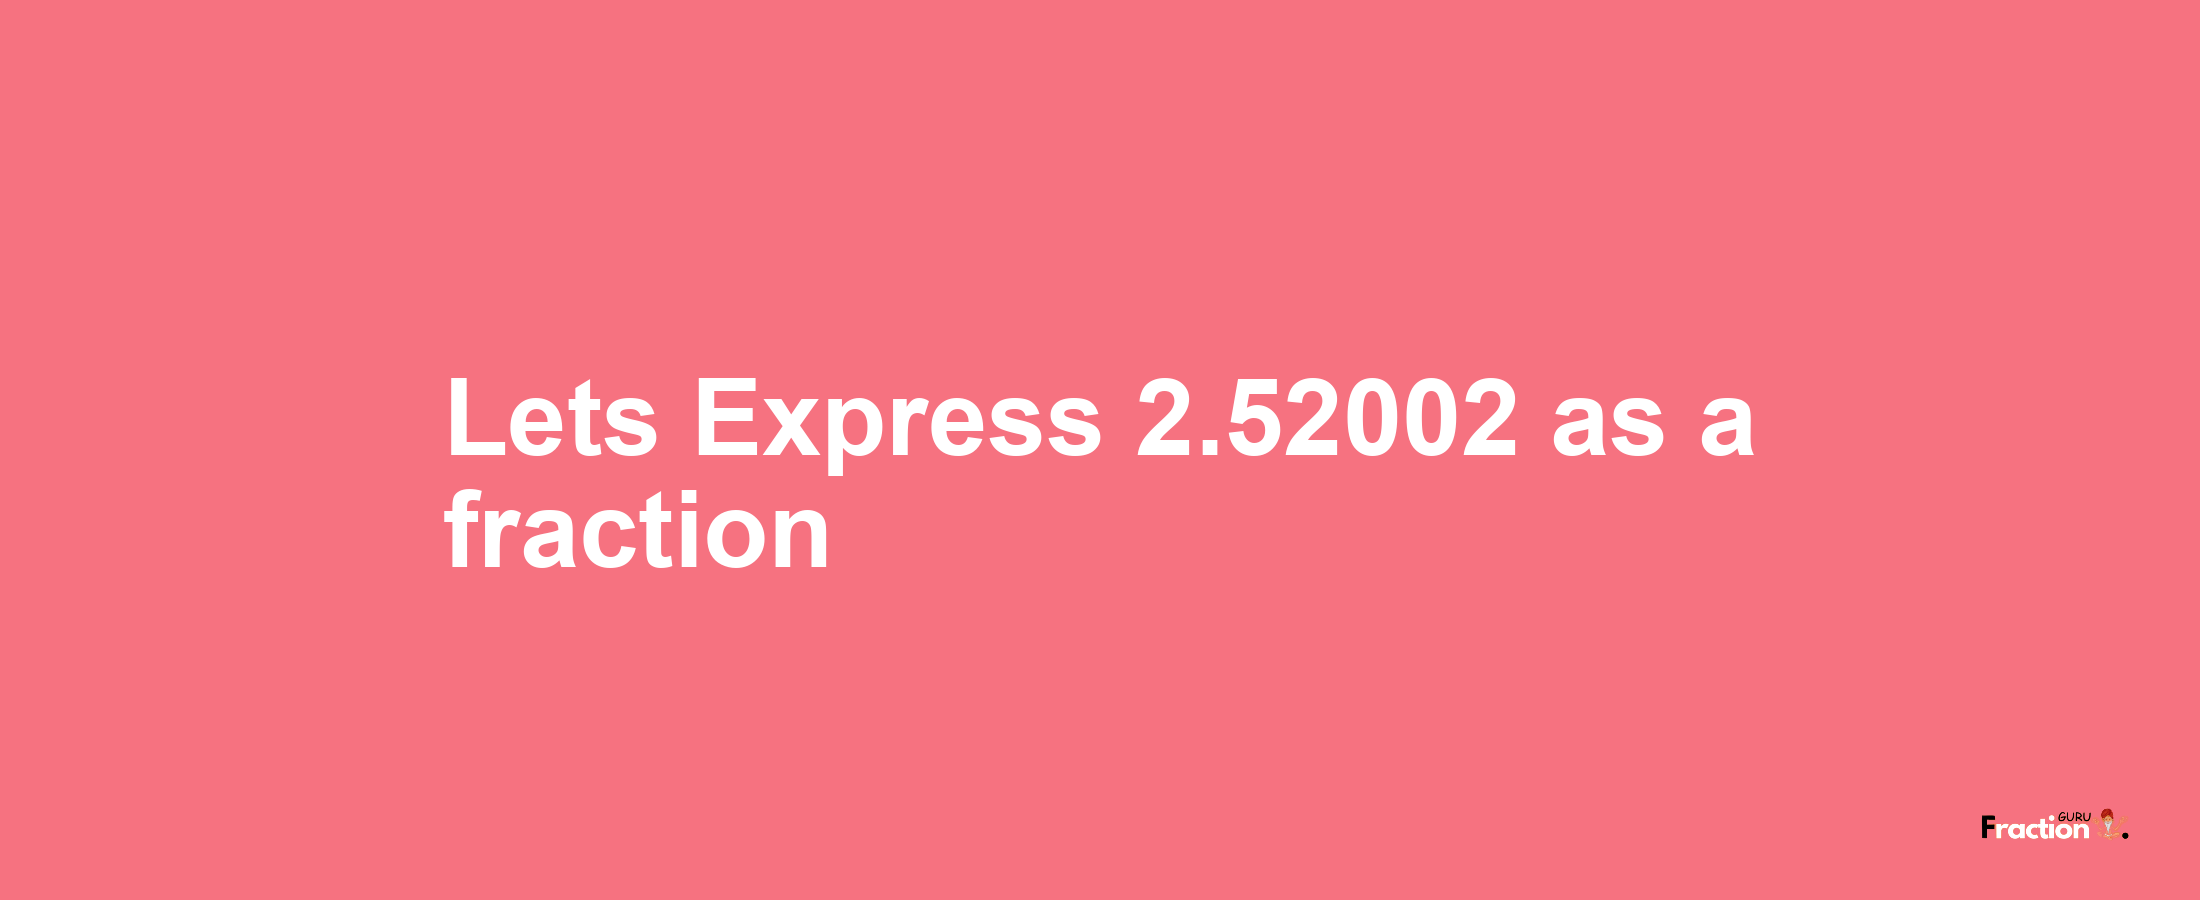 Lets Express 2.52002 as afraction